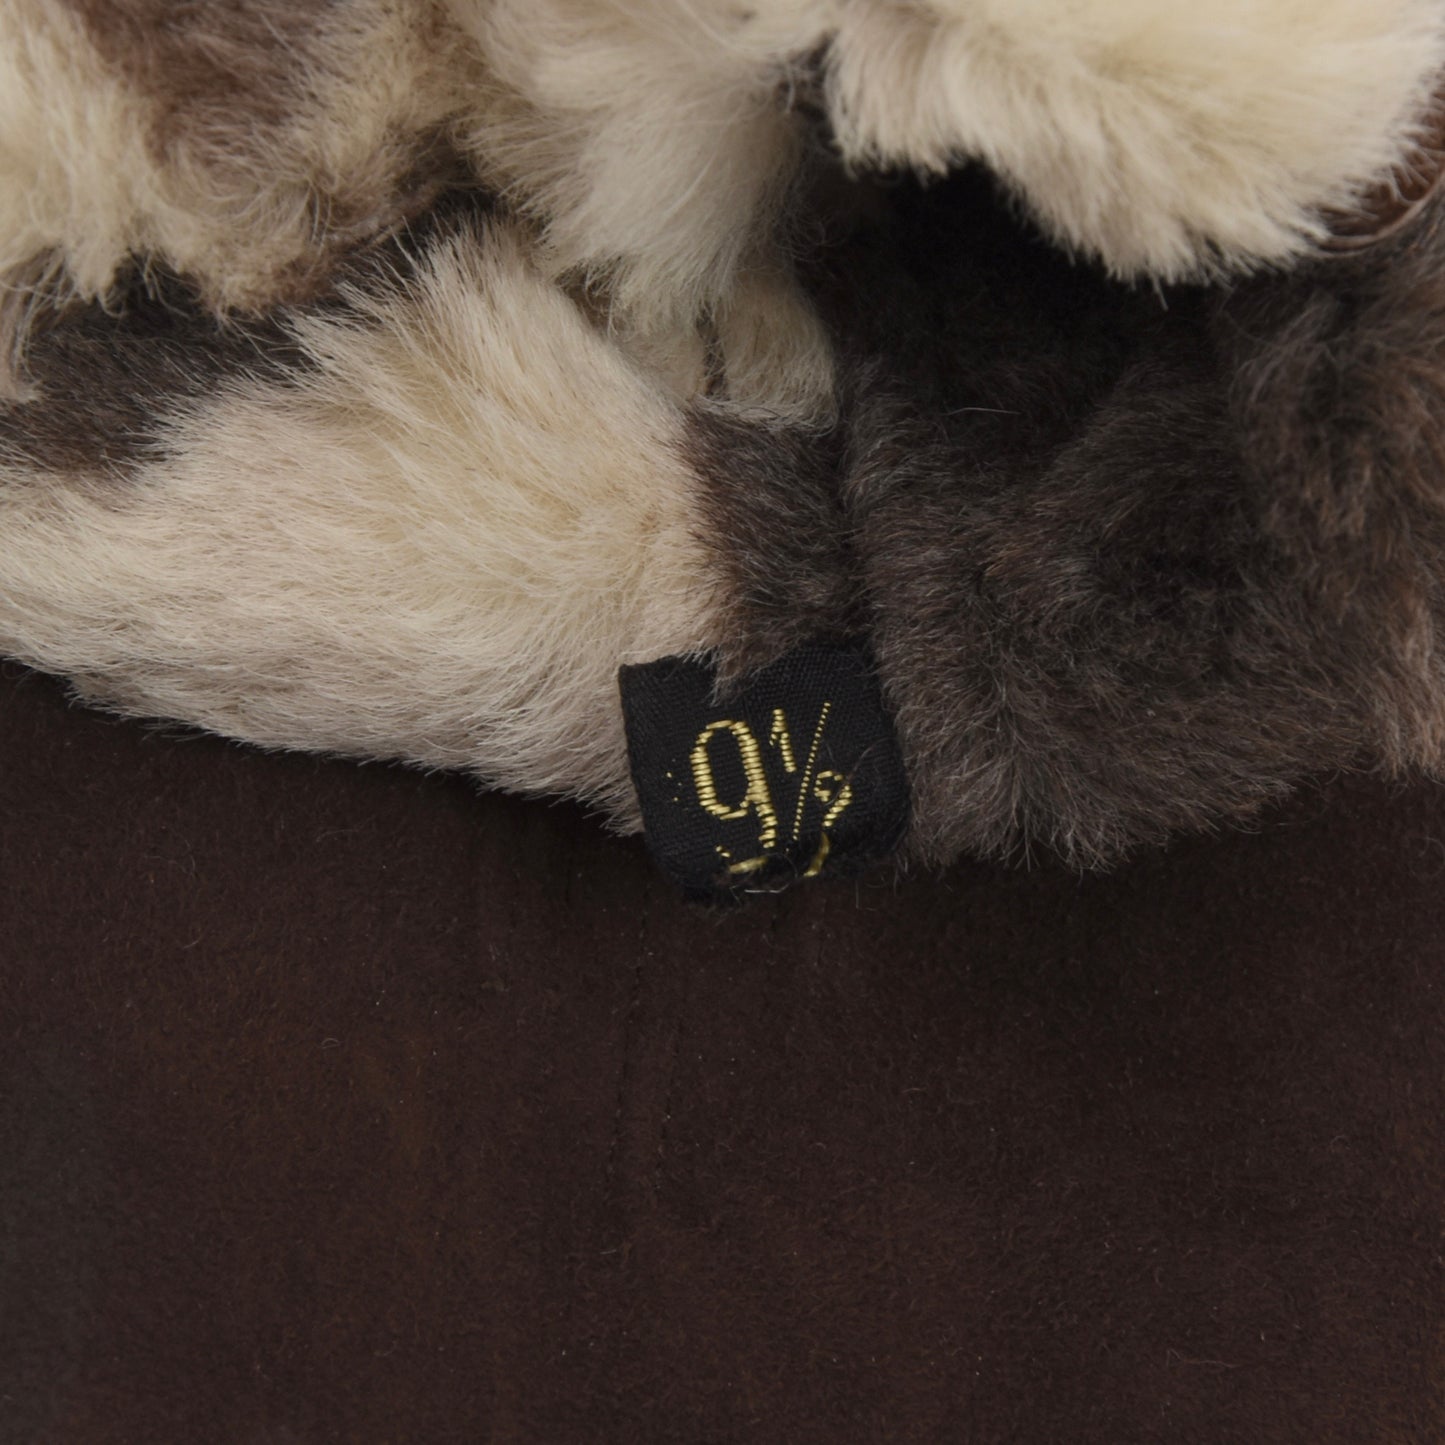 Shearling Mittens Size 9.5 - Chocolate Brown